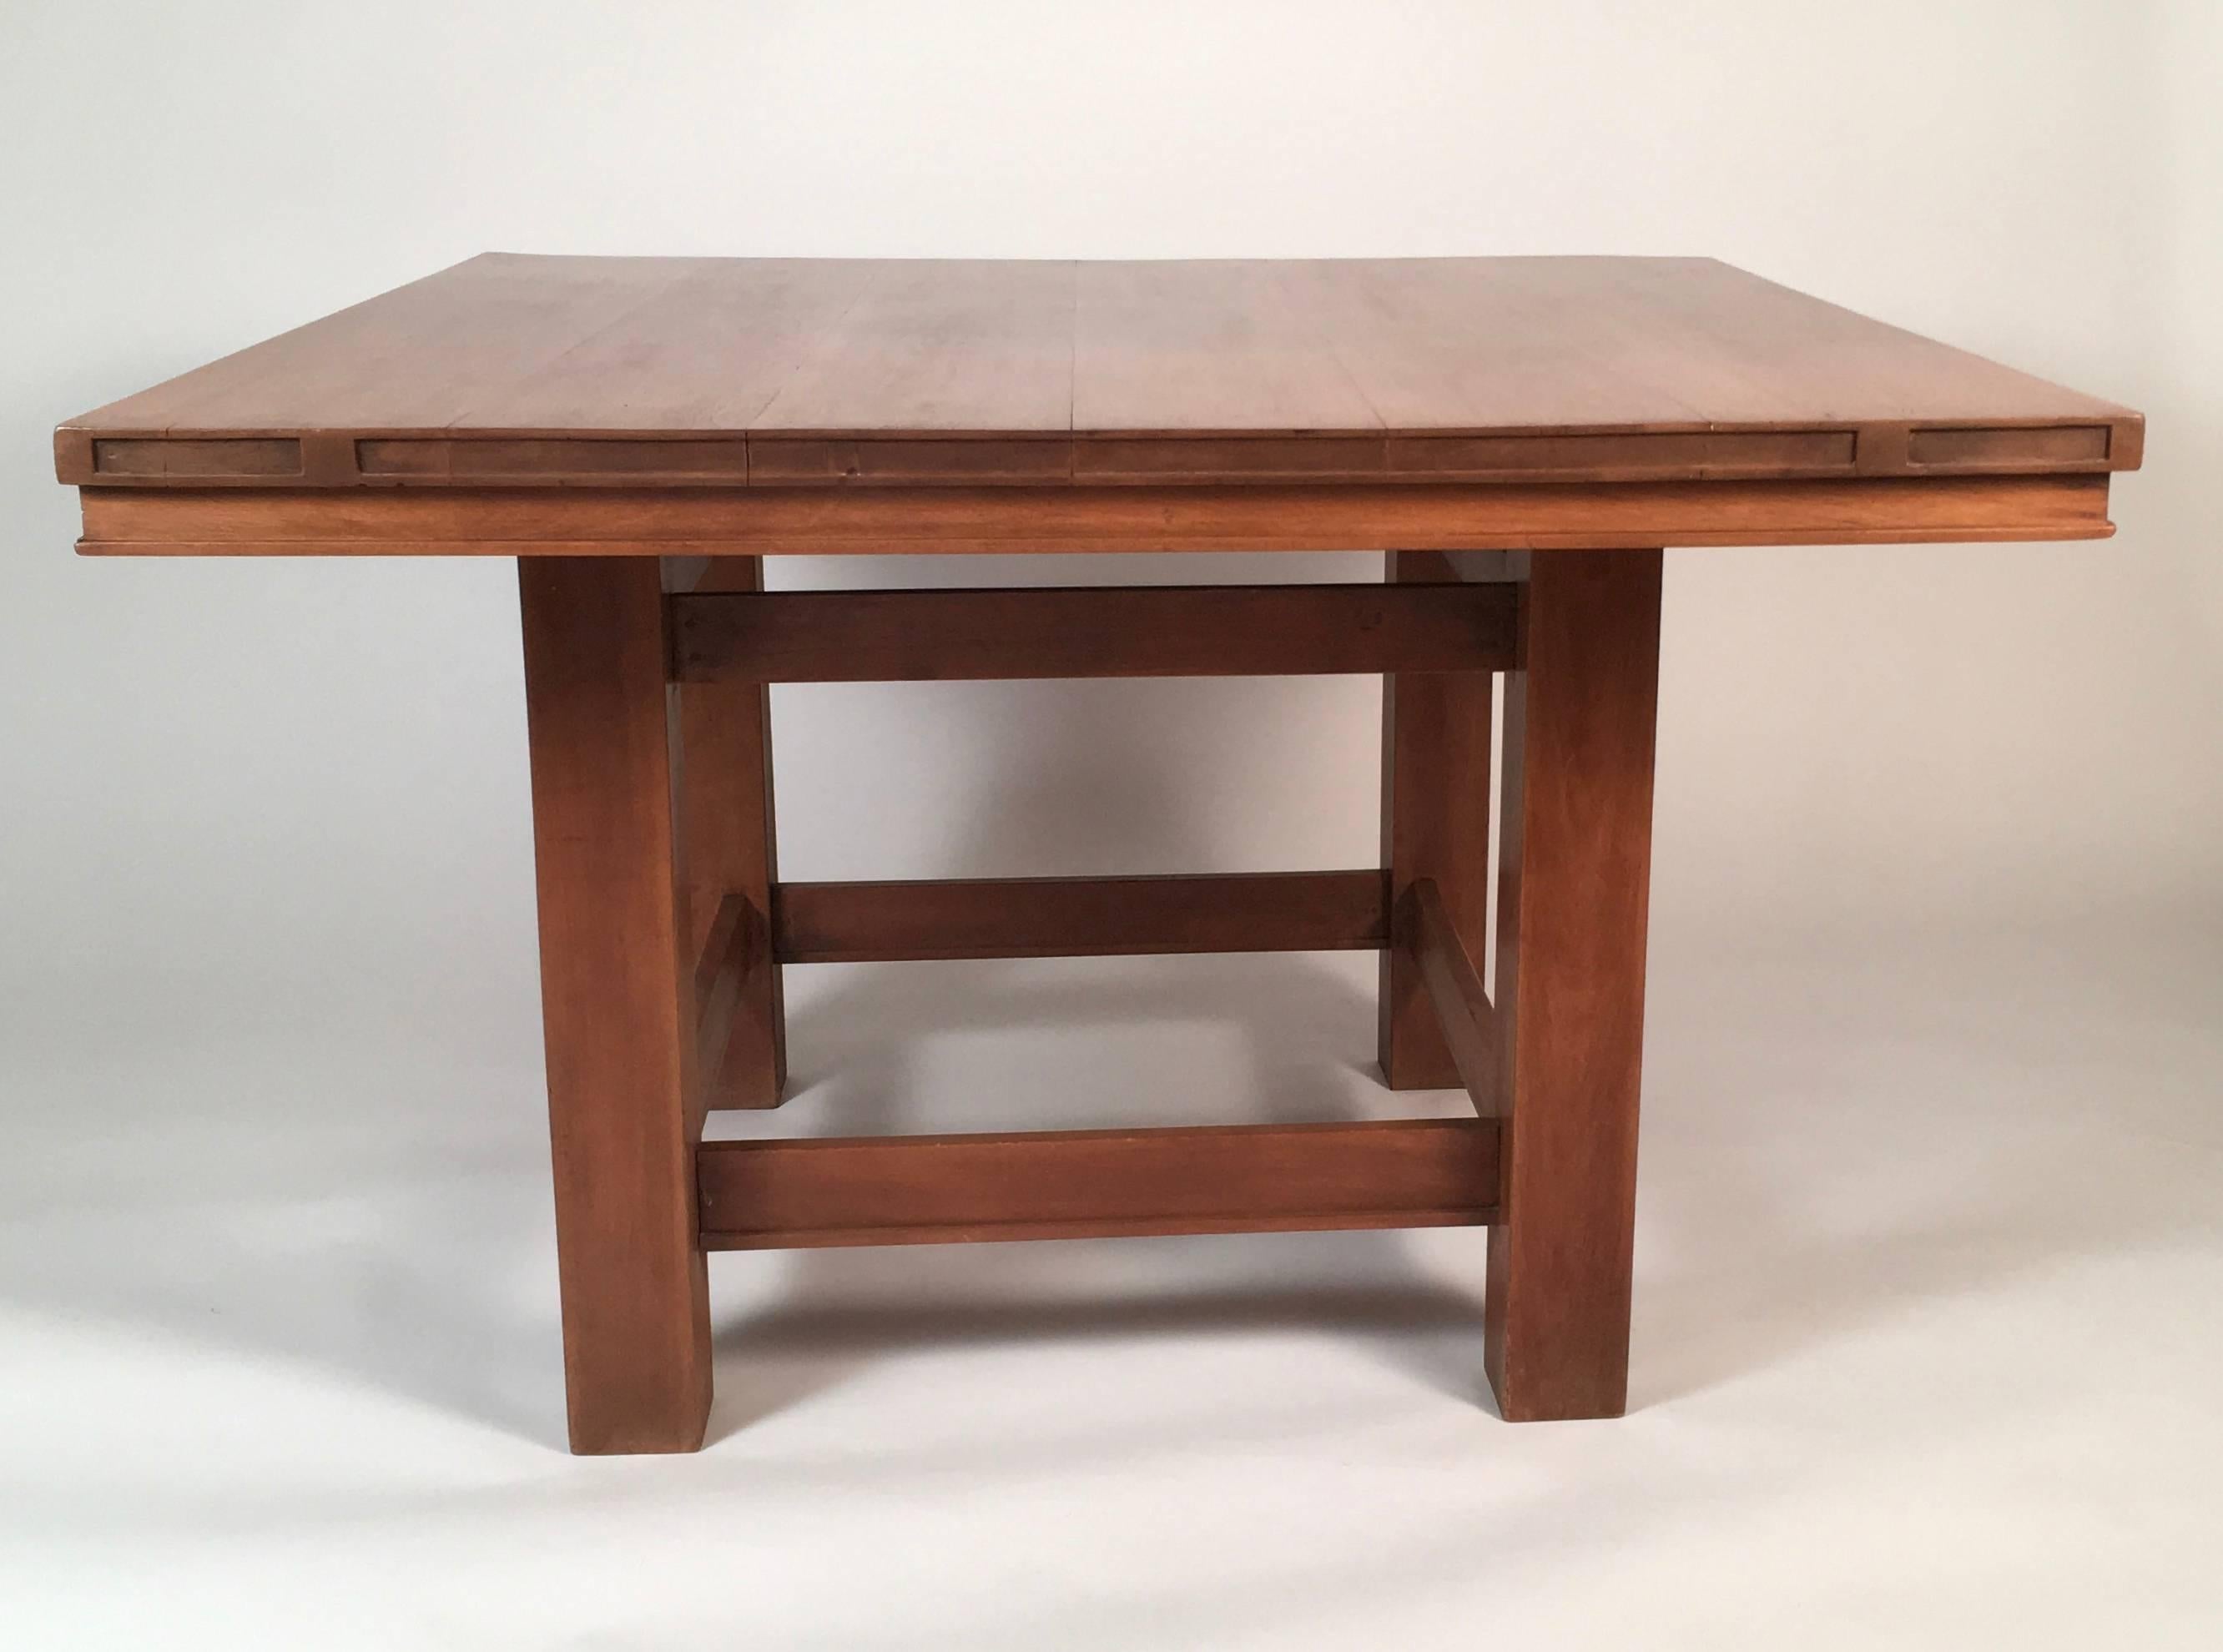 A beautiful Arts and Crafts period Prairie School table, attributed to Frank Lloyd Wright, of square form, the frieze with characteristic horizontal, Japanese-inspired shallow carved geometric decoration, over four square section legs joined by